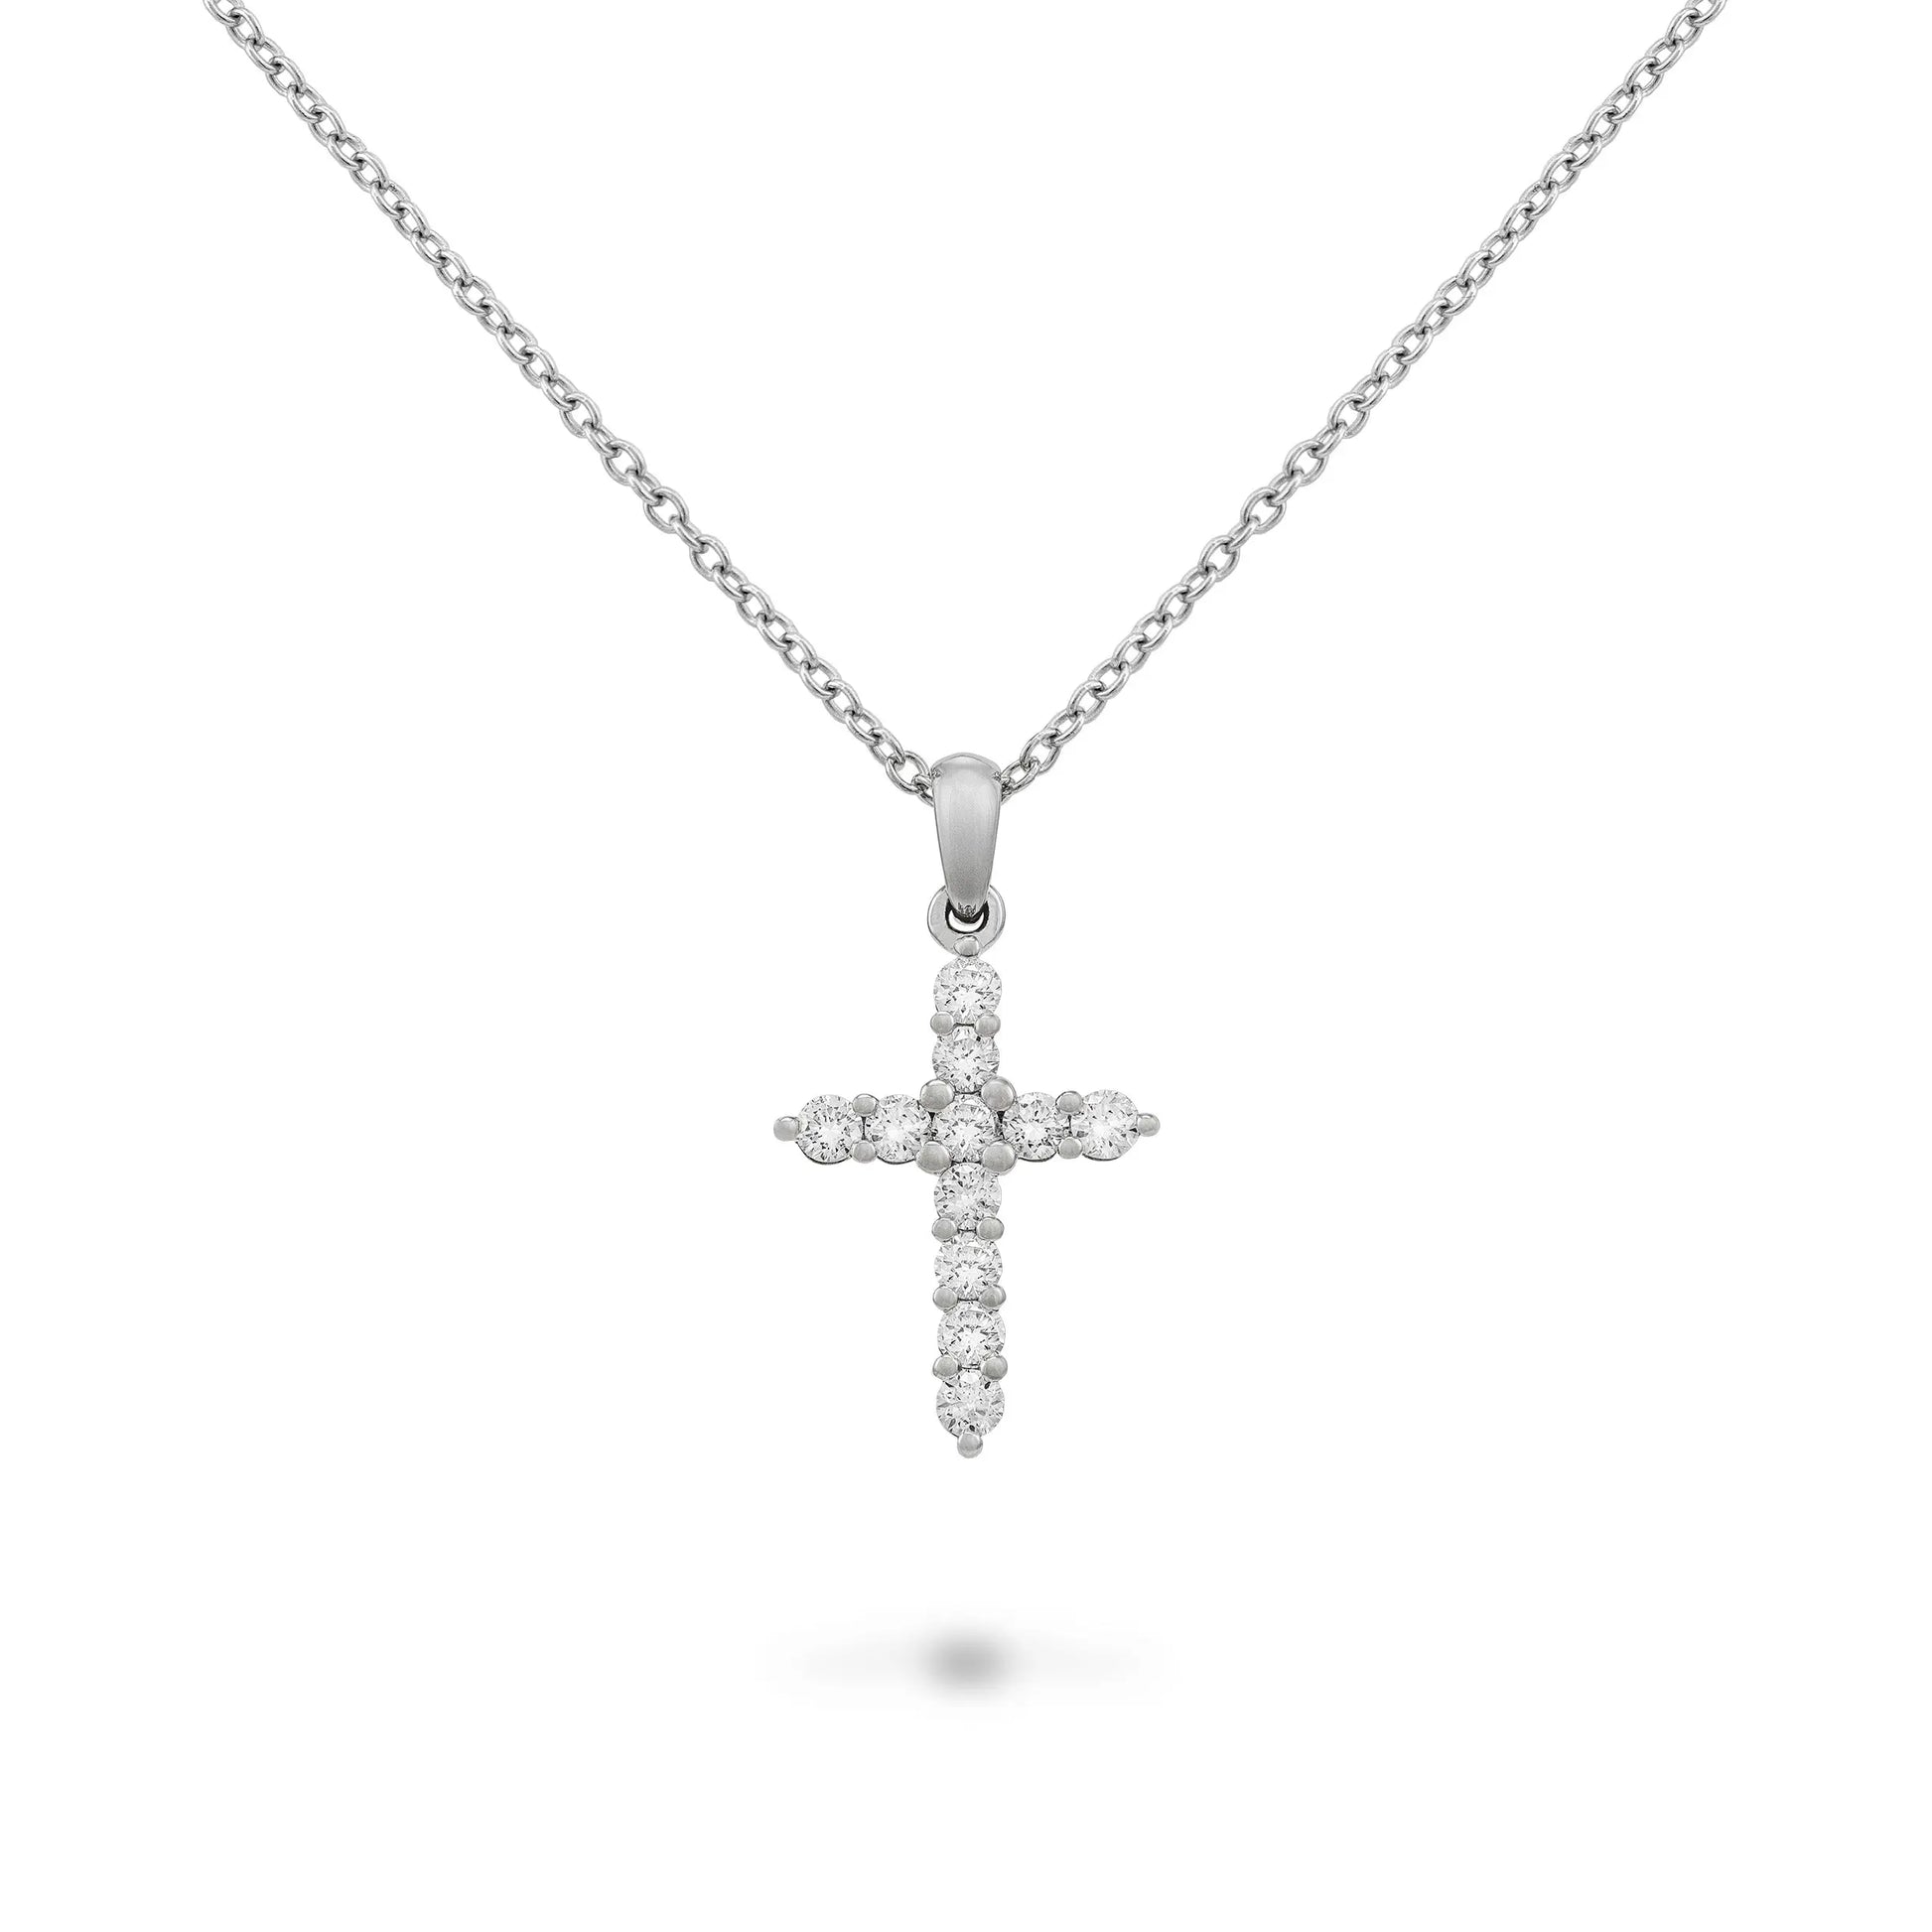 18k white gold with pave diamonds .45 cttw cross necklace  Chain length: 18 inches   Designed by Piero Milano